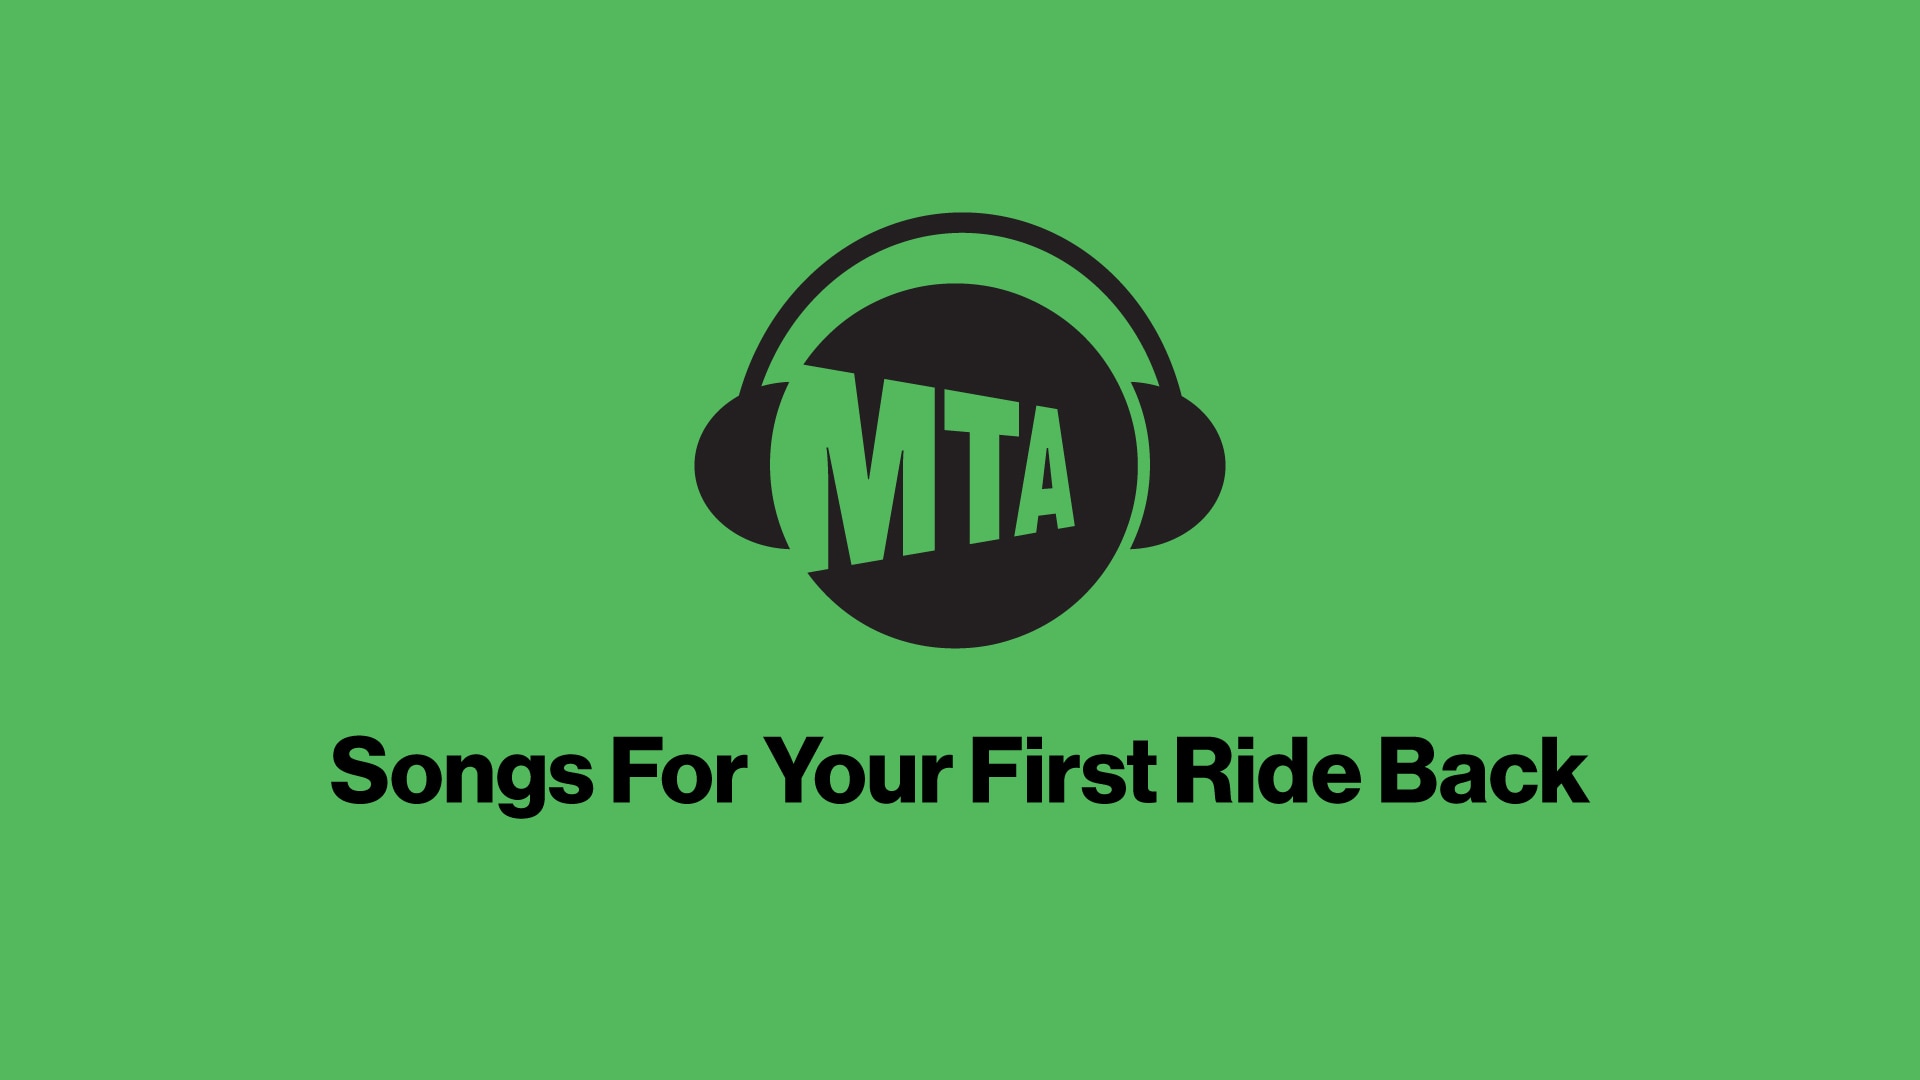 MTA Logo with Headphones. Text reads "Songs for your first ride back"